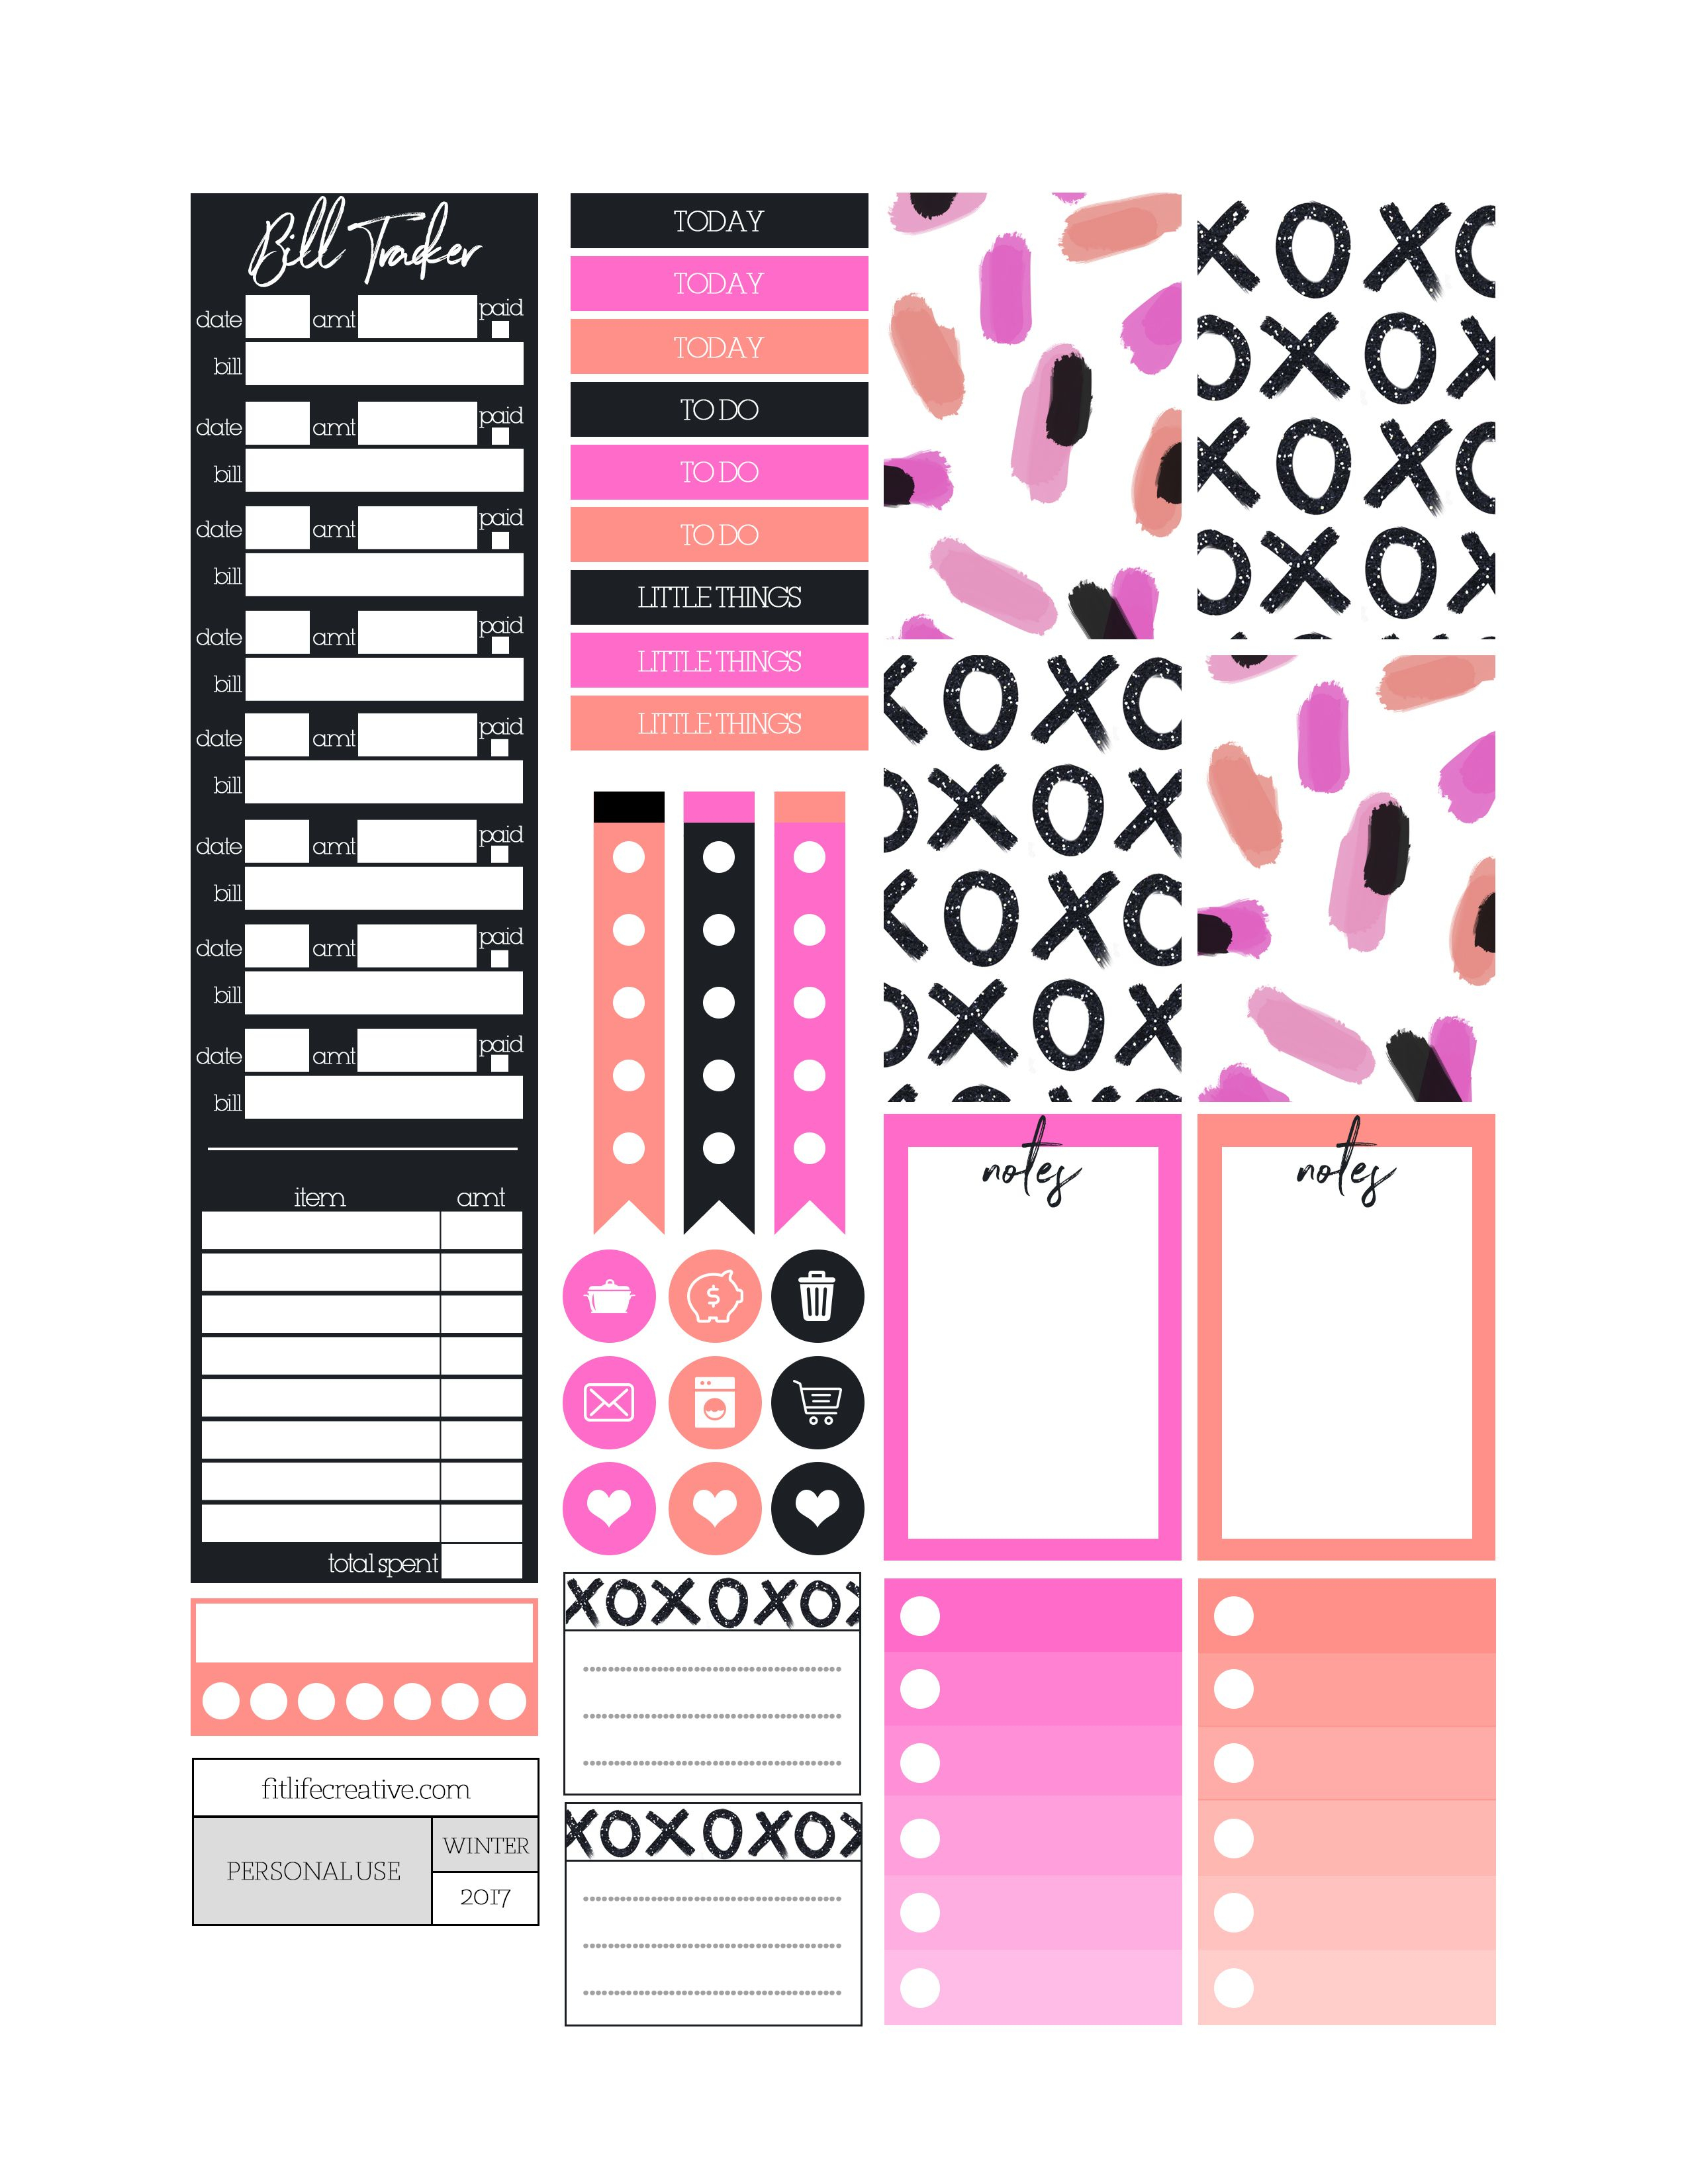 Xoxo Bold Themed Printable Planner Stickers. Includes Free Printable - Free Printable Keyboard Stickers